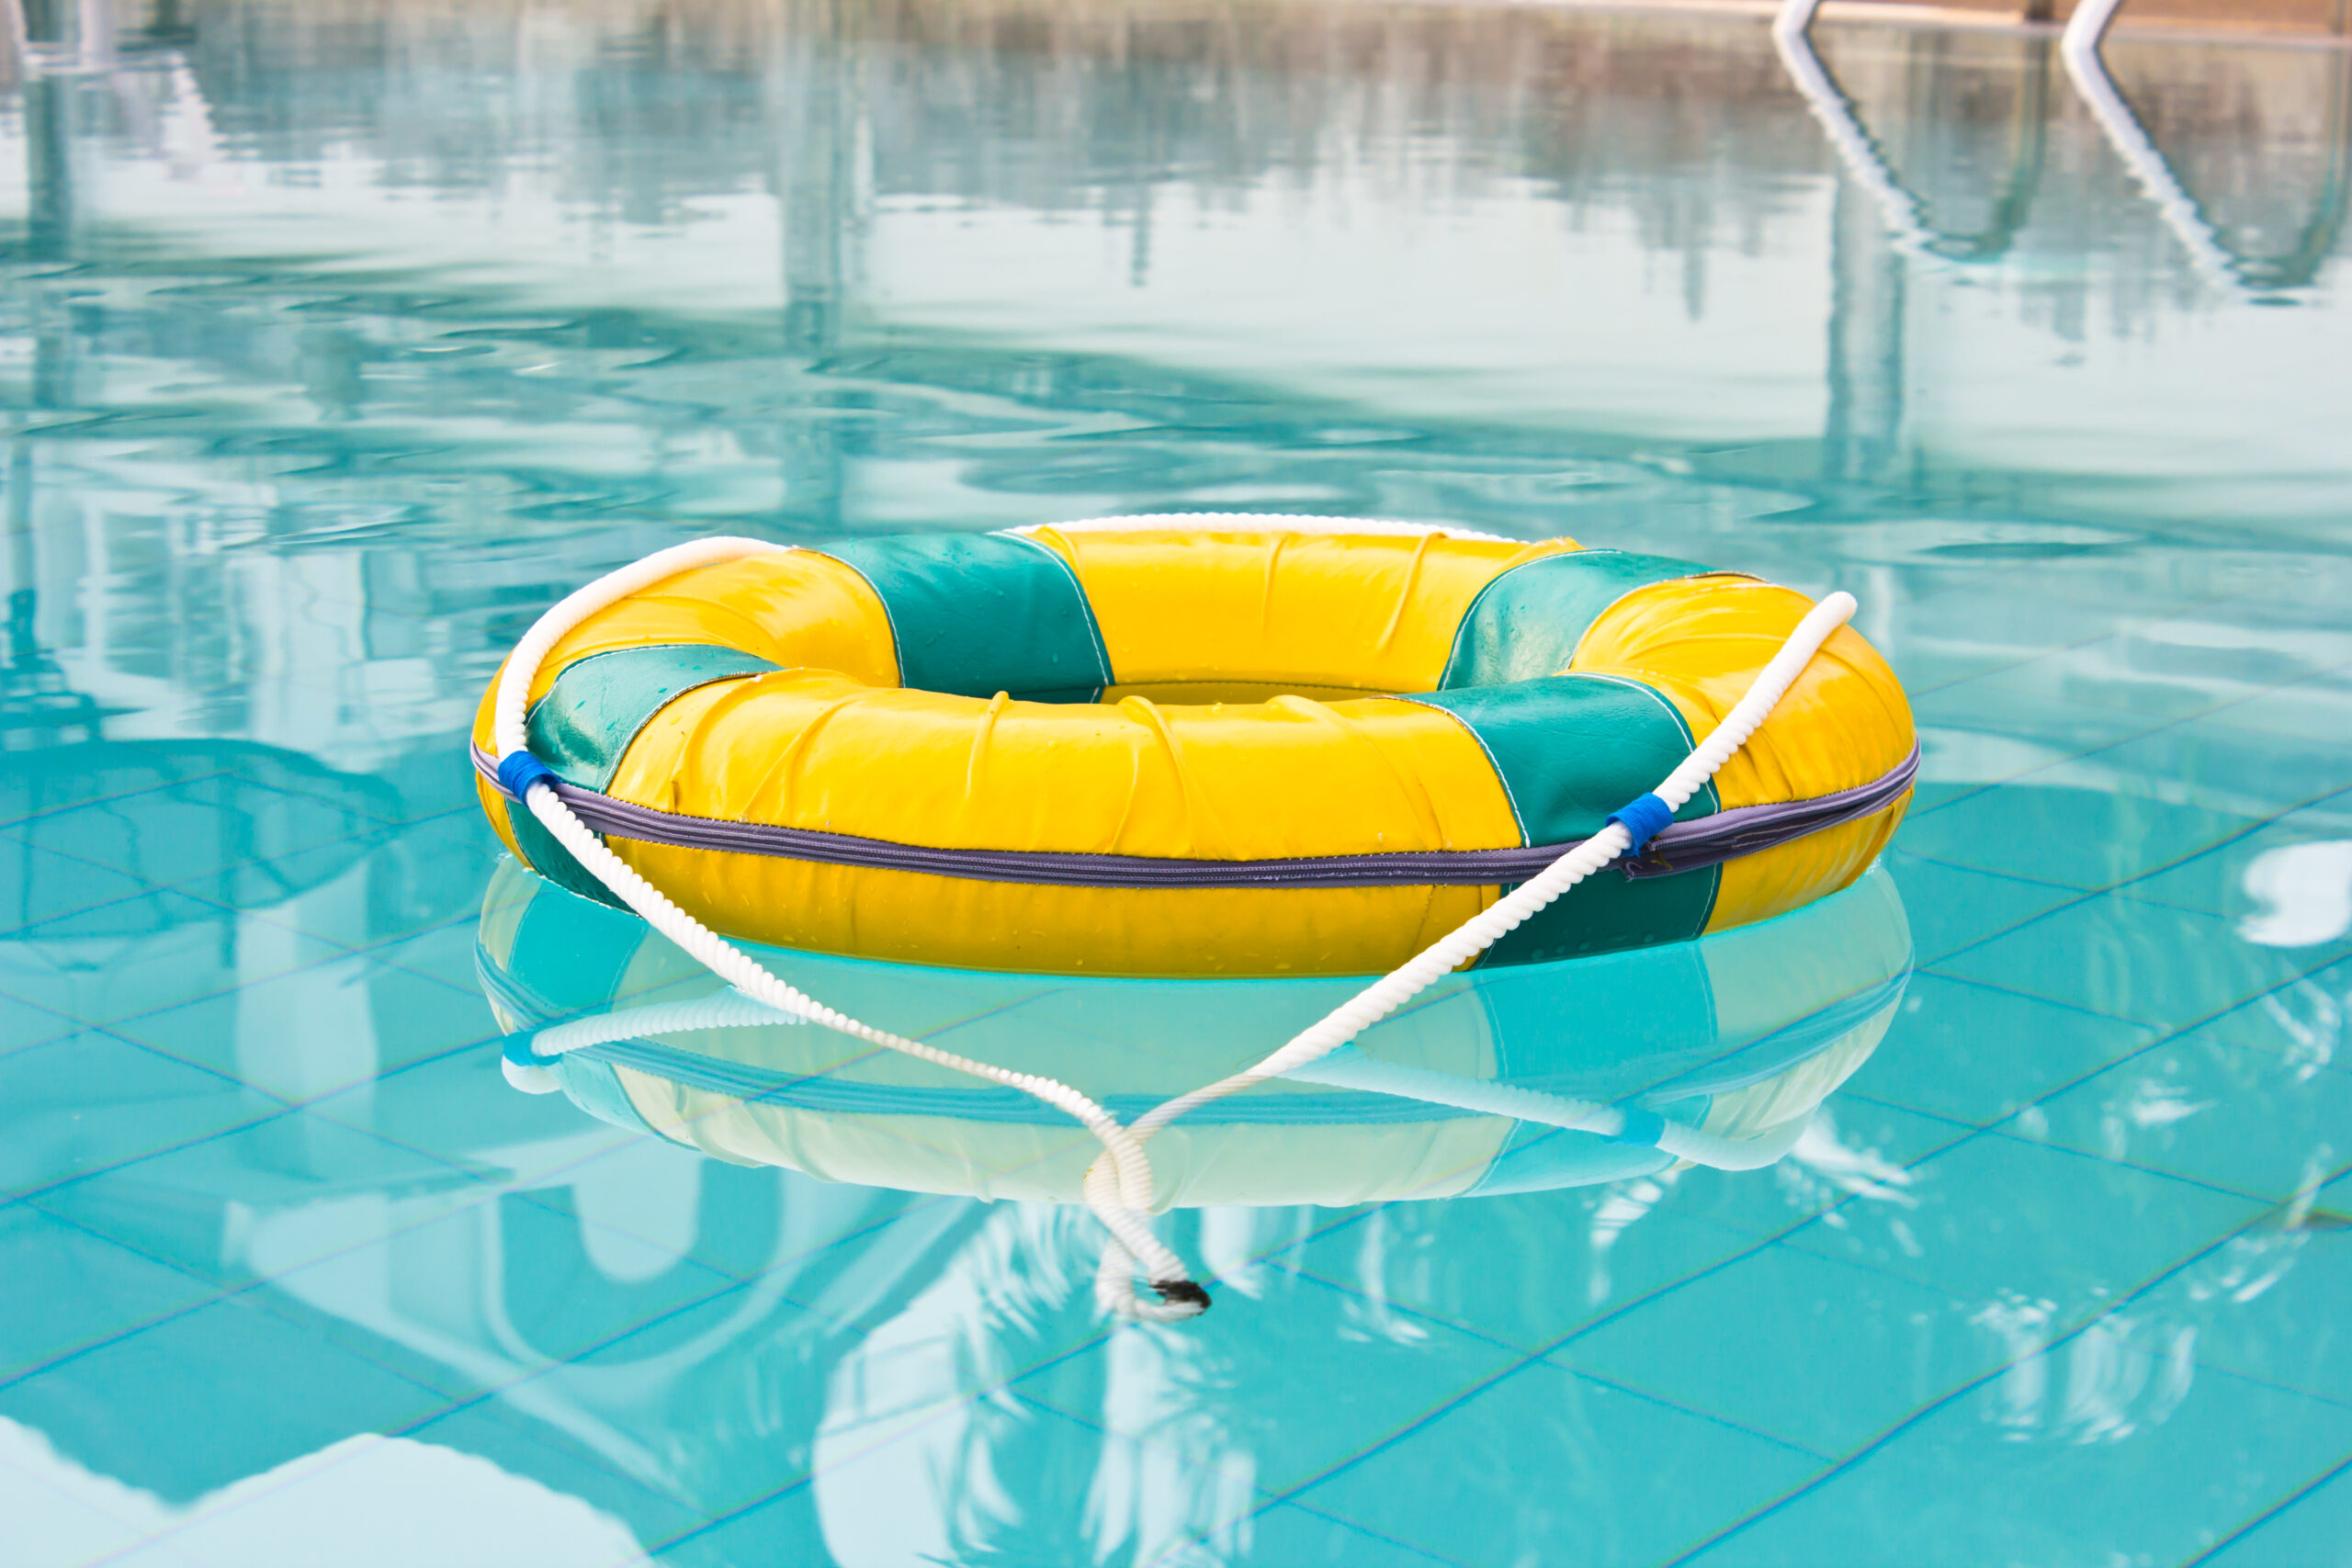 Lifebuoy floating in the pool